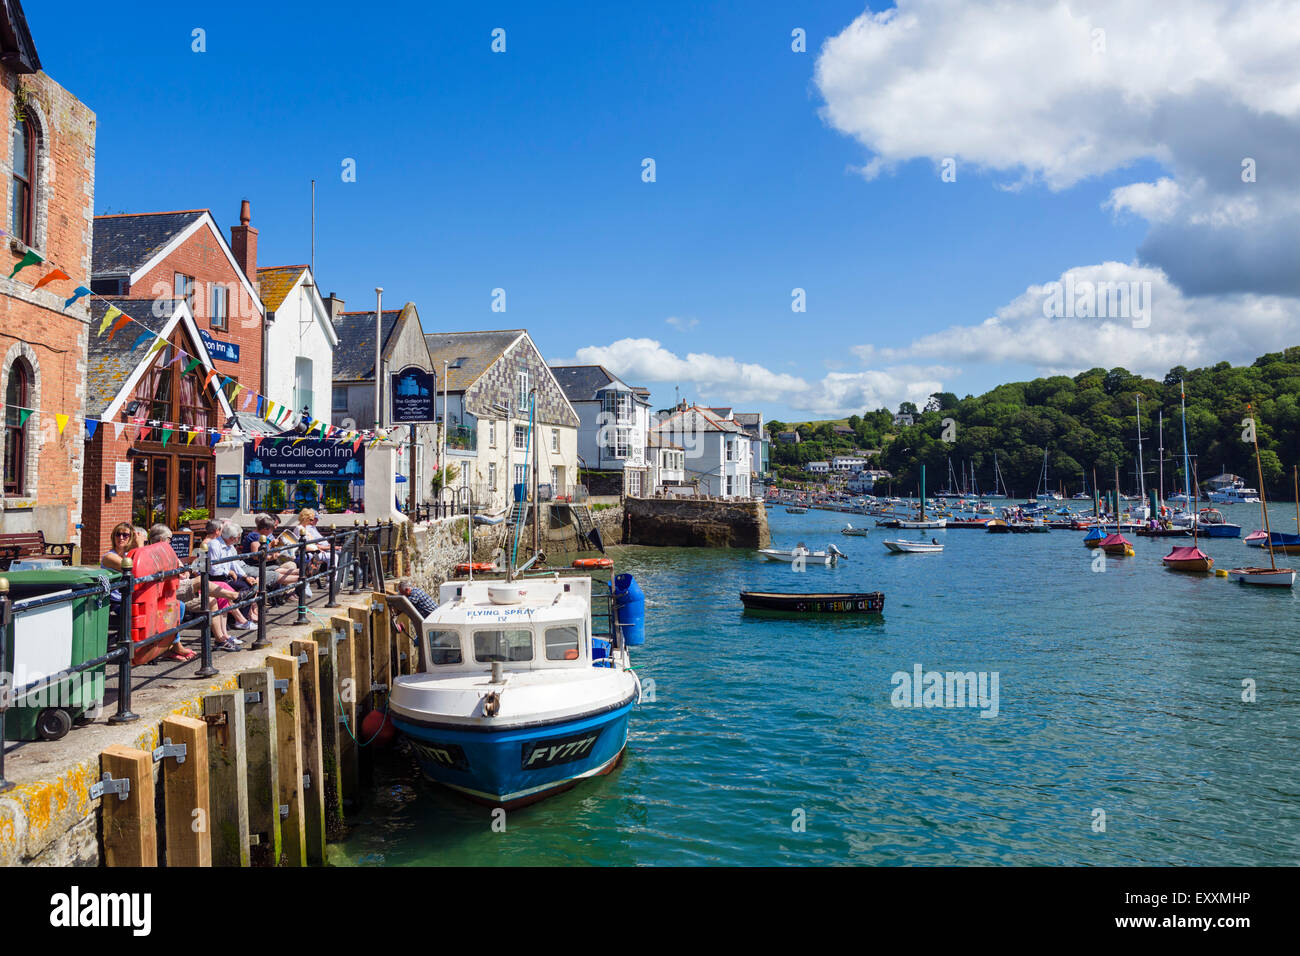 The waterfront in Fowey, Cornwall, England, UK Stock Photo